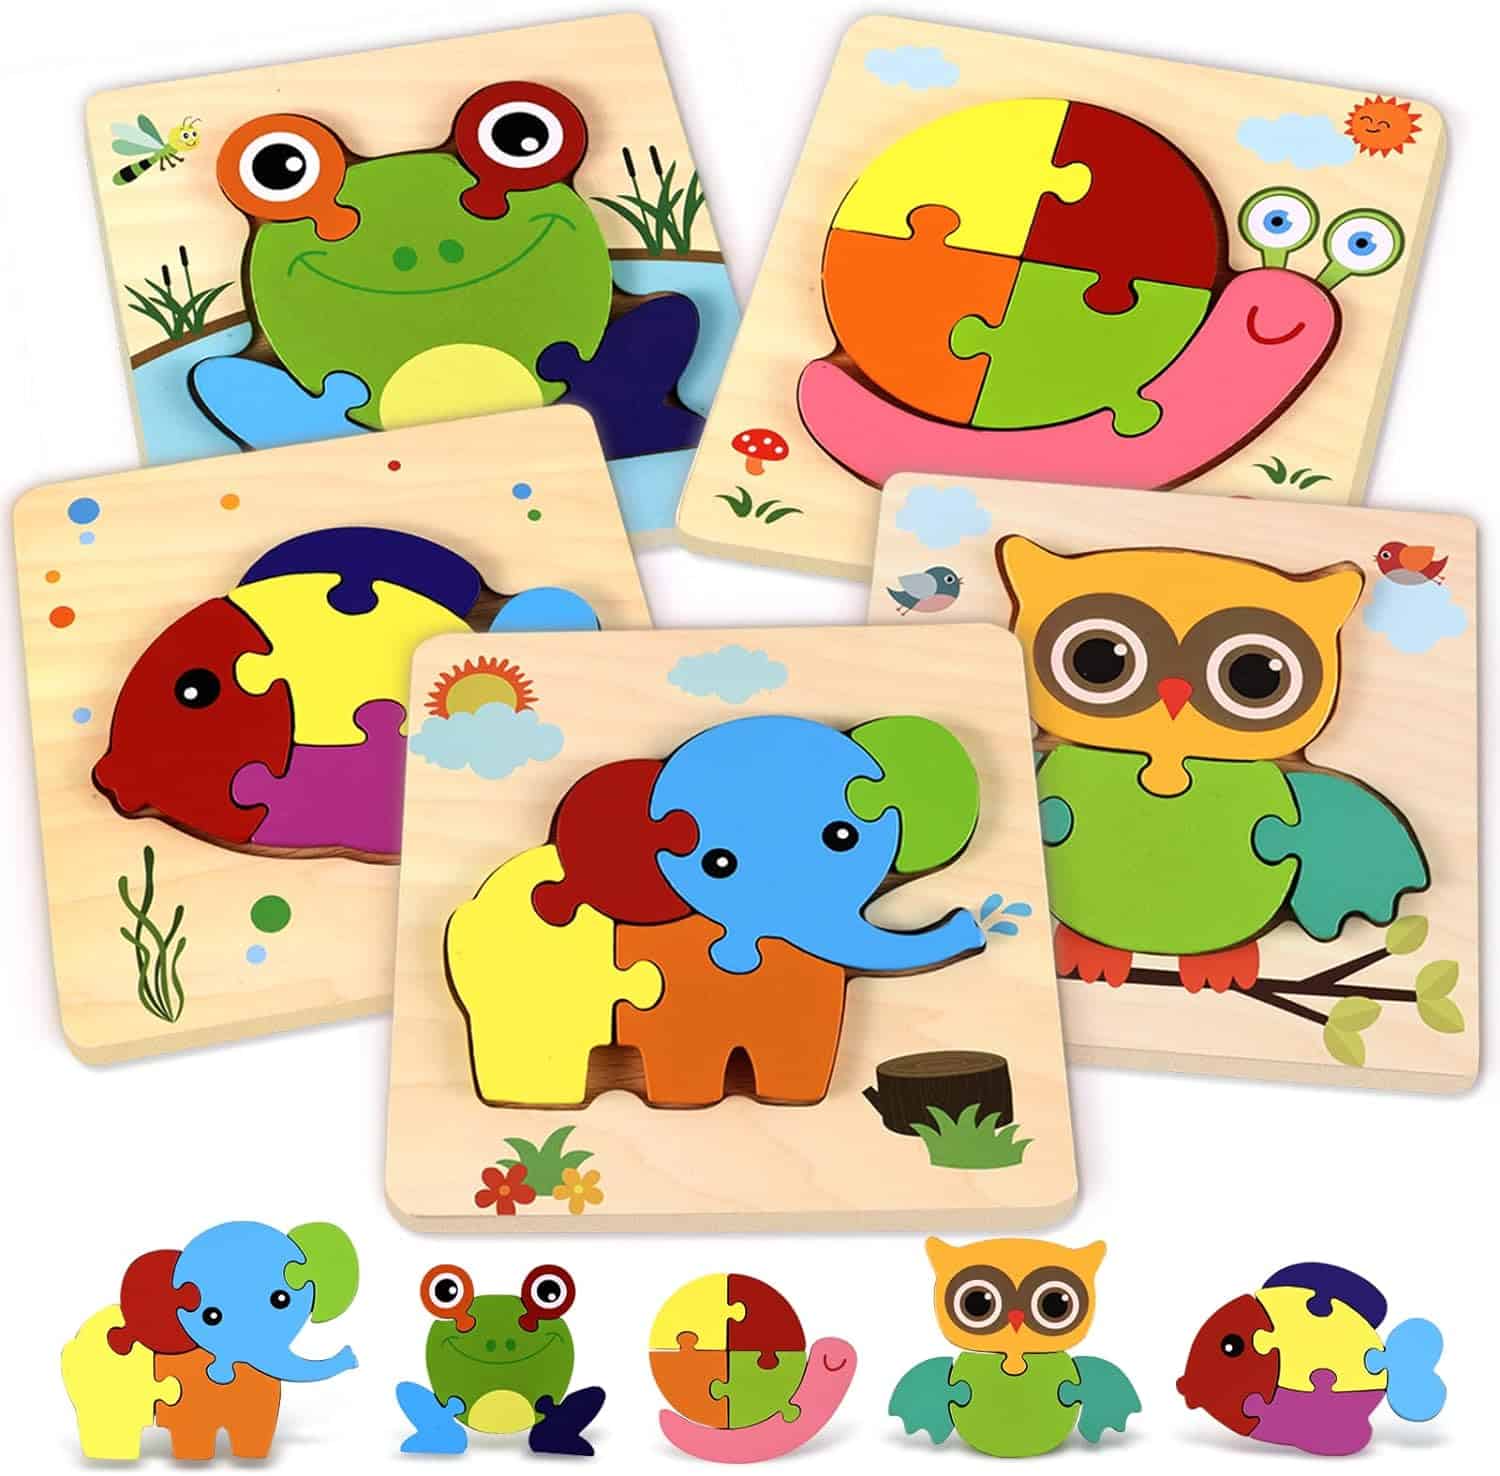 Wooden Jigsaw Puzzles - Educational Wooden Puzzles in Animal Design Shapes with Vibrant Colors, Set of 5 Brain Teaser Puzzles for Boys and Girls with Drawstring Storage Bag